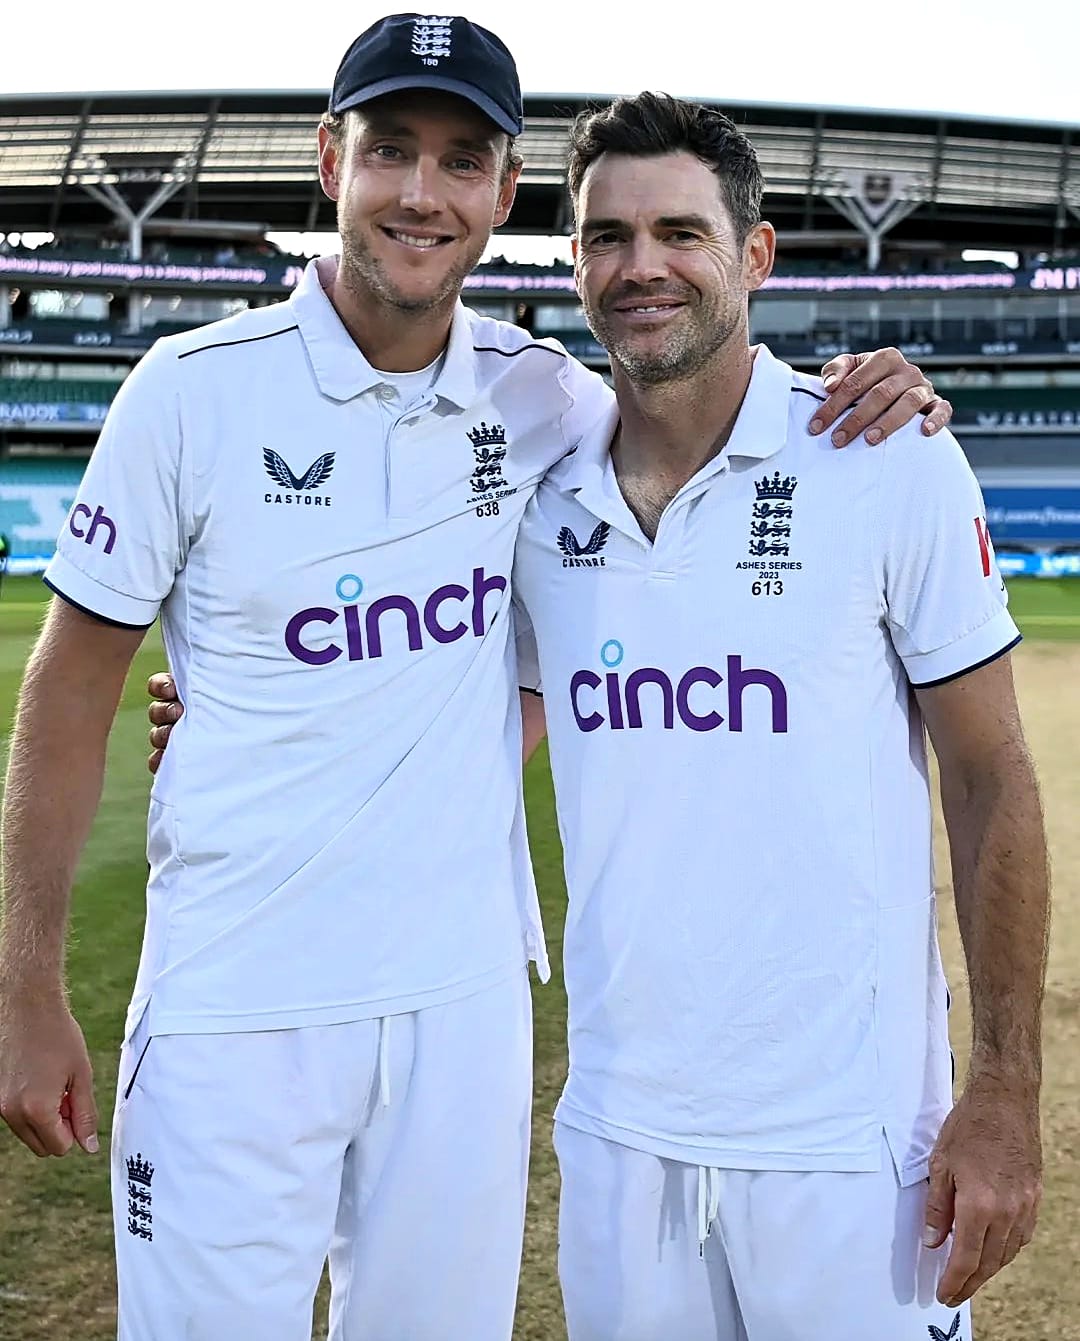 Stuart Broad and James Anderson. Pic Credits: Twitter.